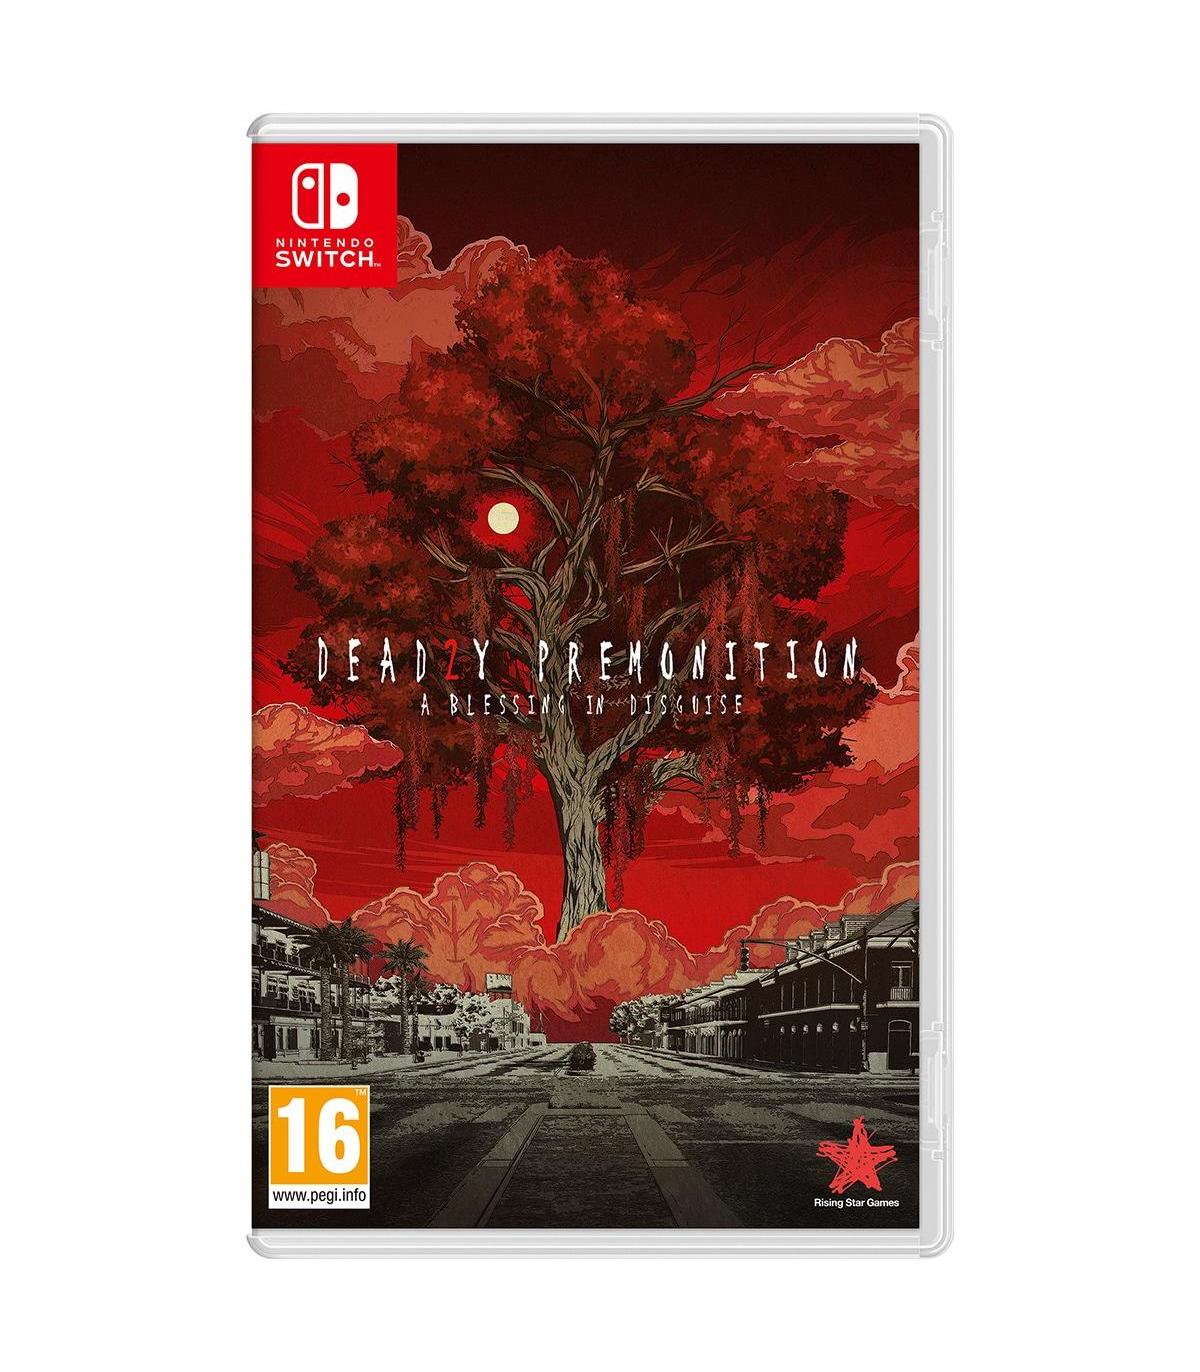 deadly premonition 2 a blessing in disguise nintendo switch download free